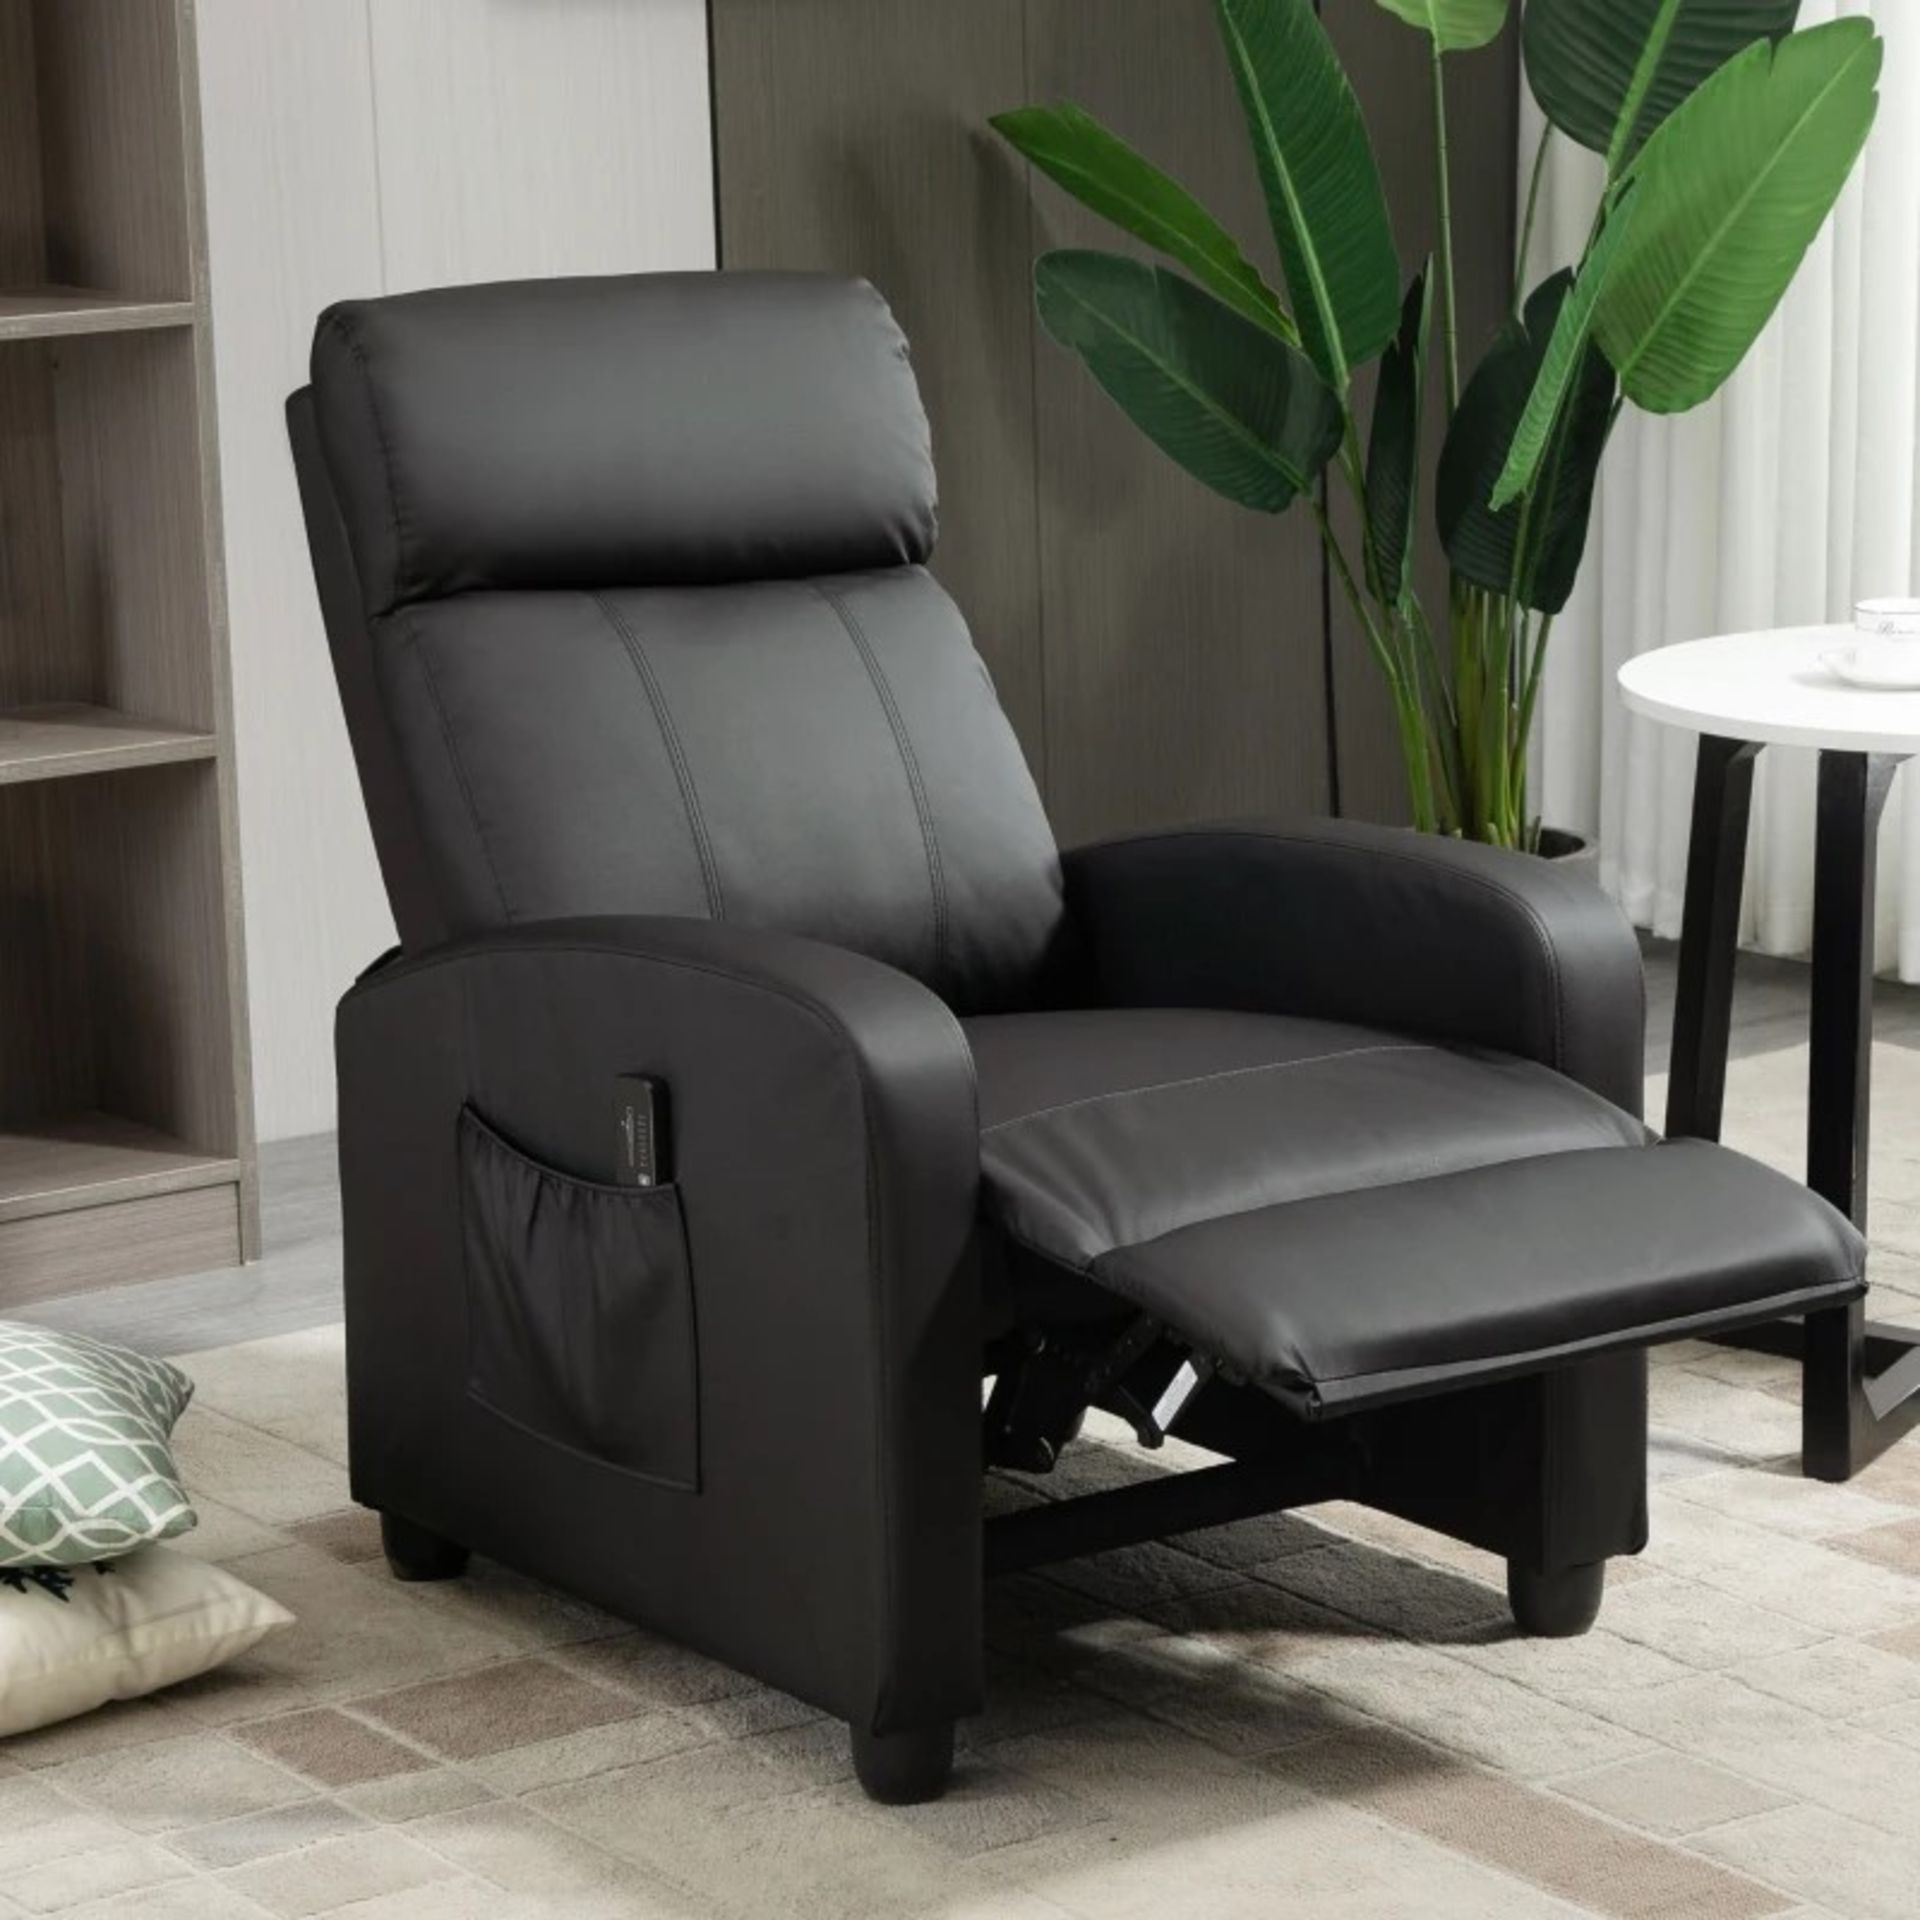 RRP £229.99 - Recliner Sofa Chair PU Leather Massage Armcair w/ Remote Control, Black - Image 2 of 5